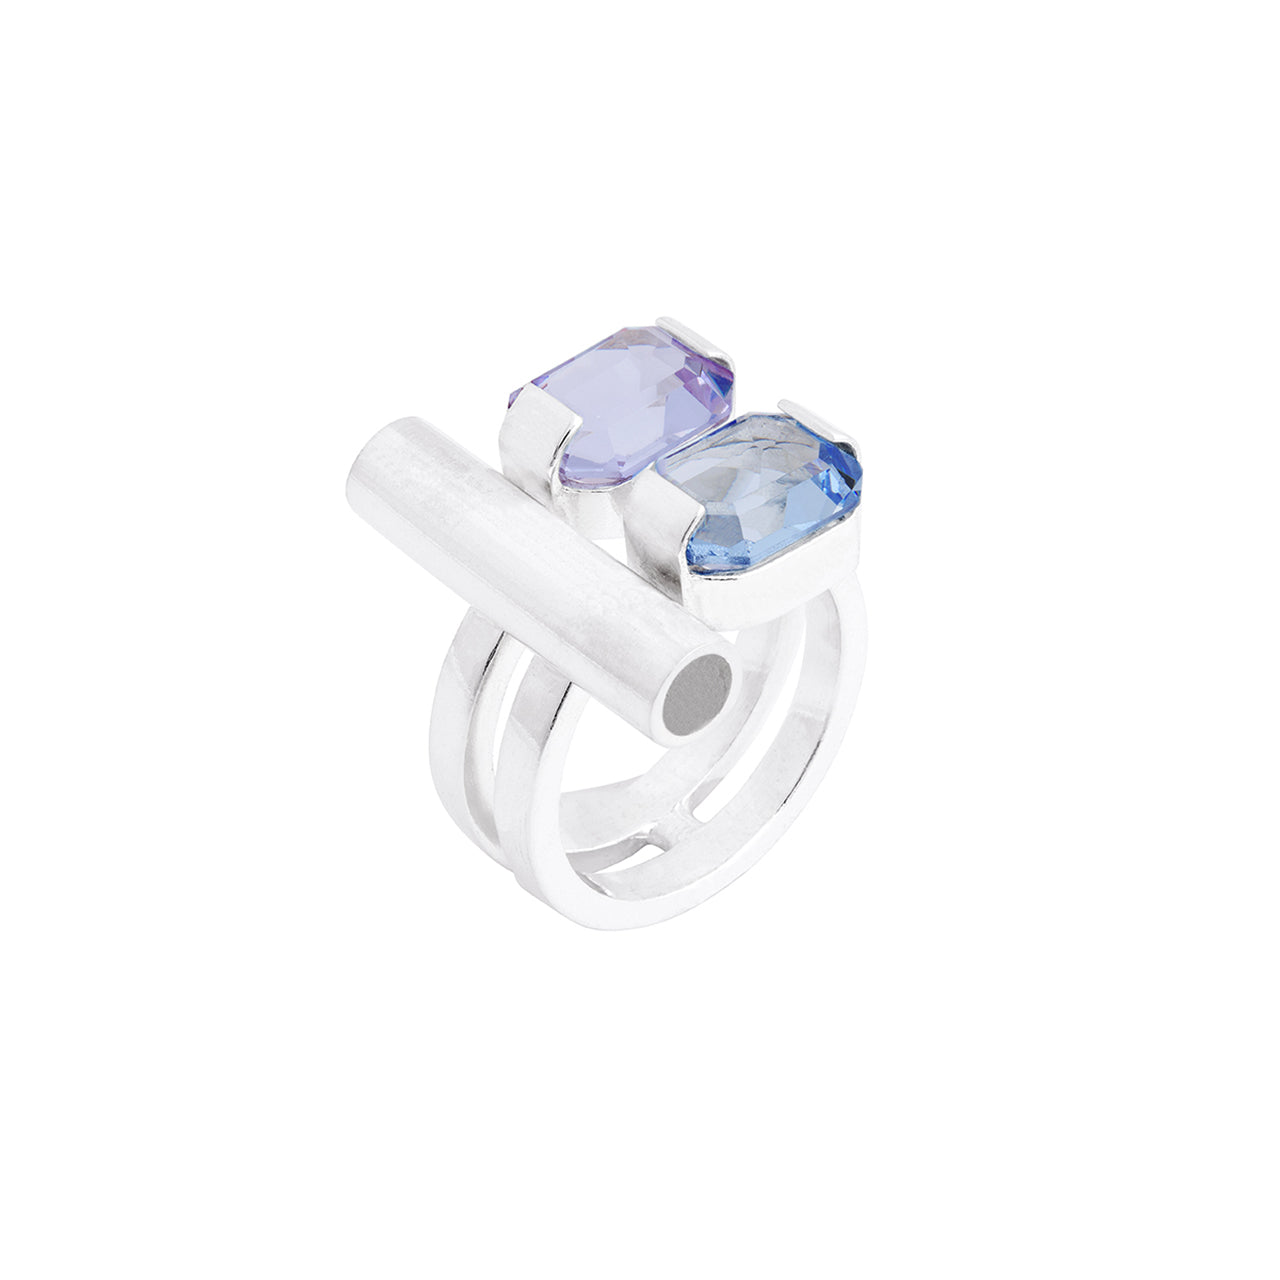 silver dash ring with vintage purple and blue stones